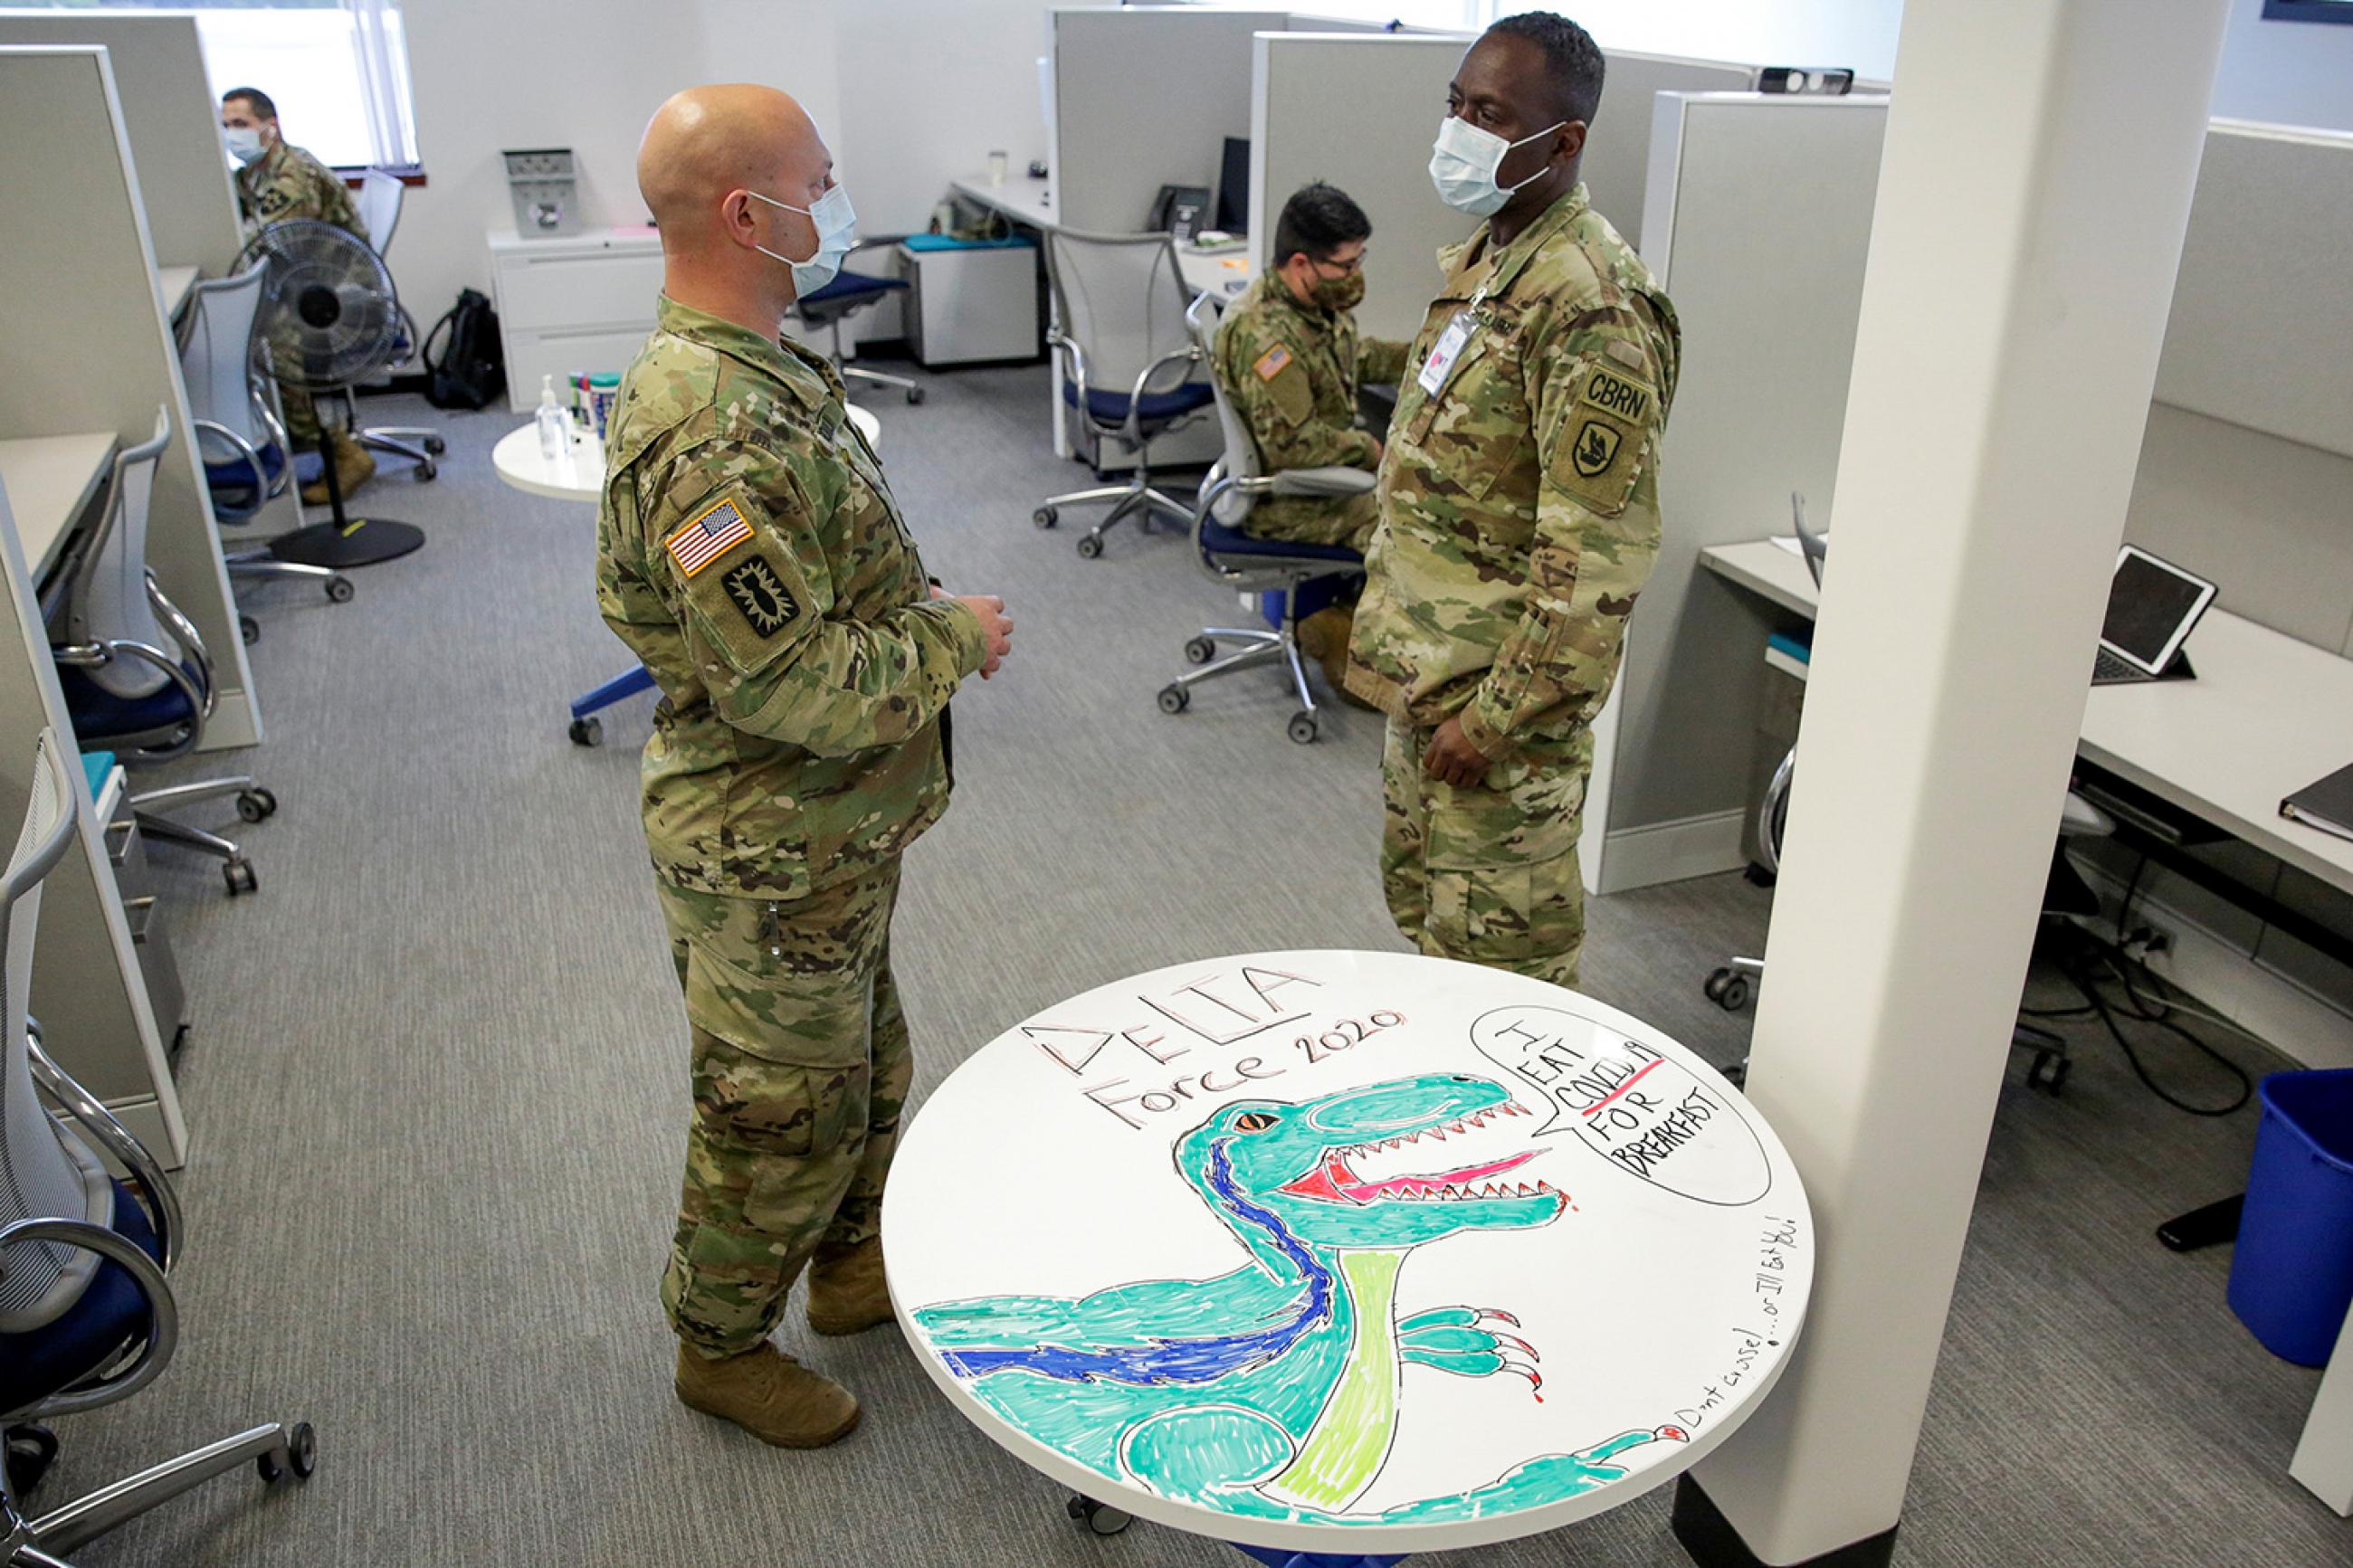 A militarized approach to contact tracing is shown here as National Guard members at the Washington State Department of Health support contact tracing efforts in Tumwater, Washington—on May 20, 2020. The photo shows the guard members standing around a cubicle space talking. A table in the foreground is decorated with a drawing of a dinosaur and emblazoned with the words "I eat COVID-19 for breakfast. REUTERS/Jason Redmond